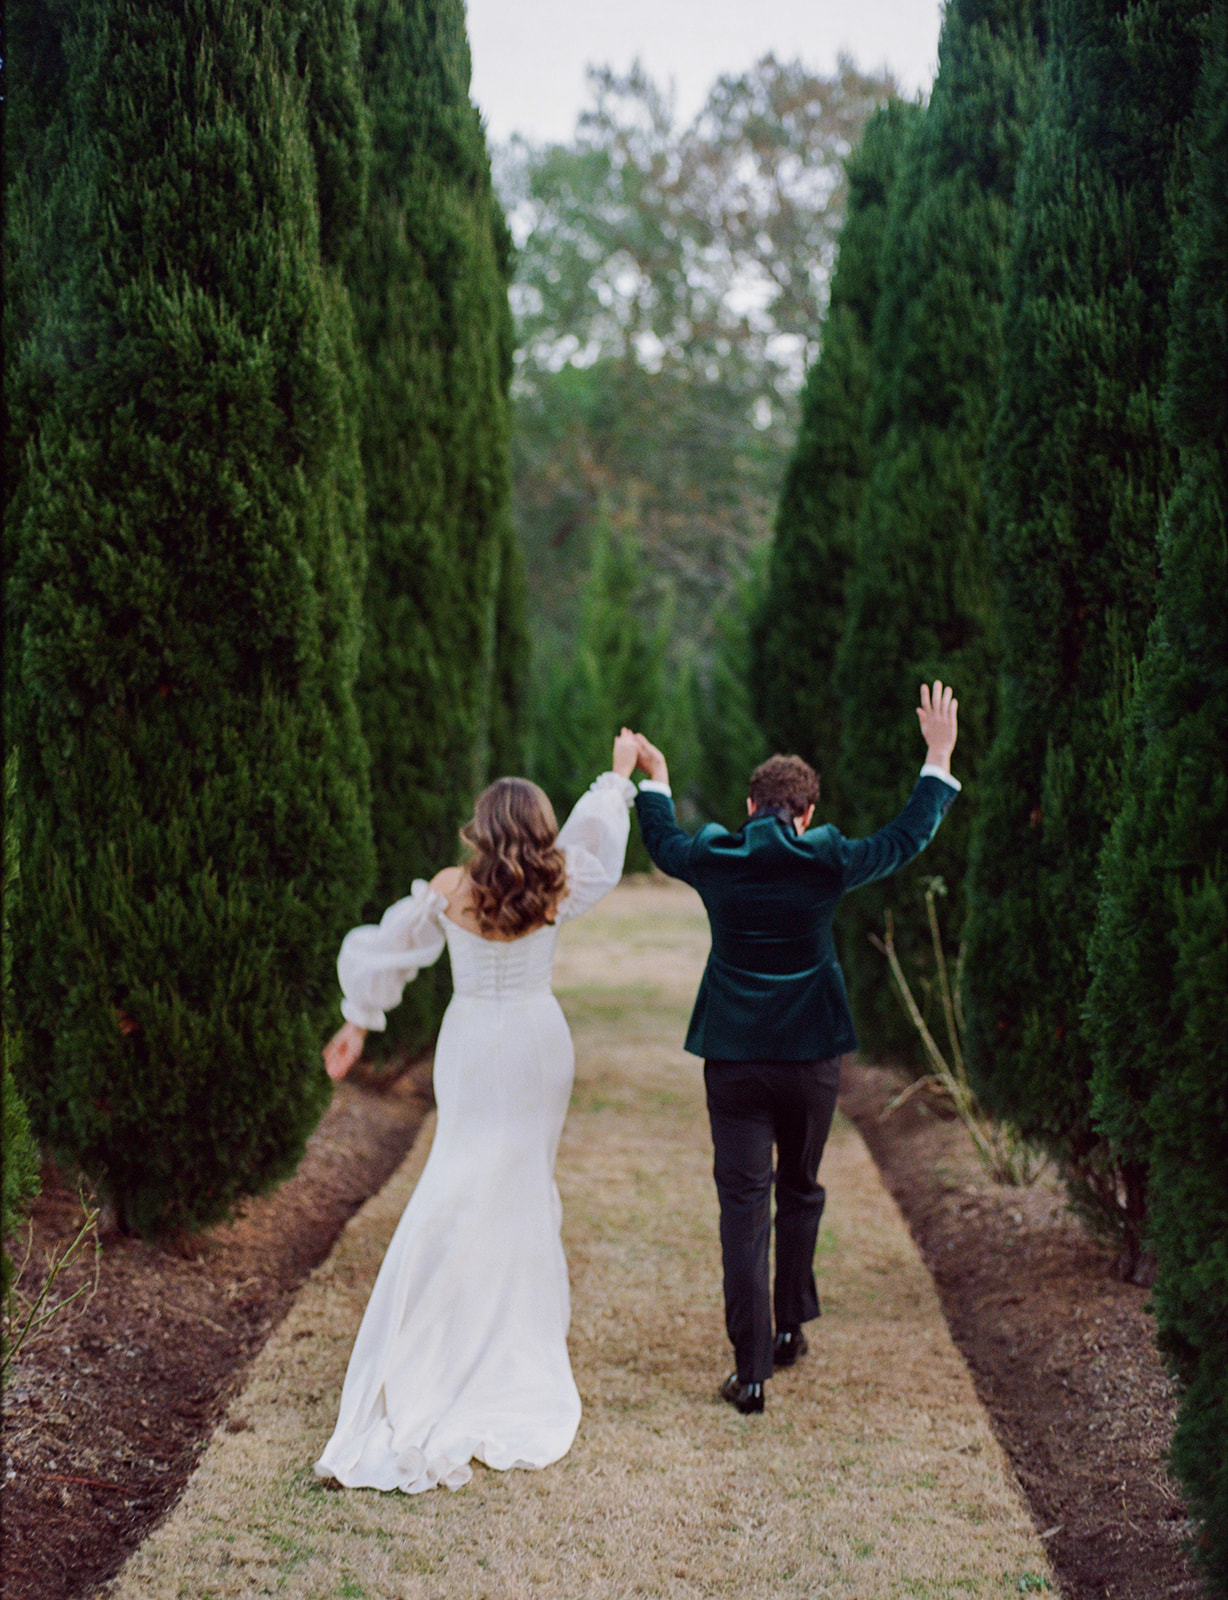 bride and groom celebrate holding hands in air and running